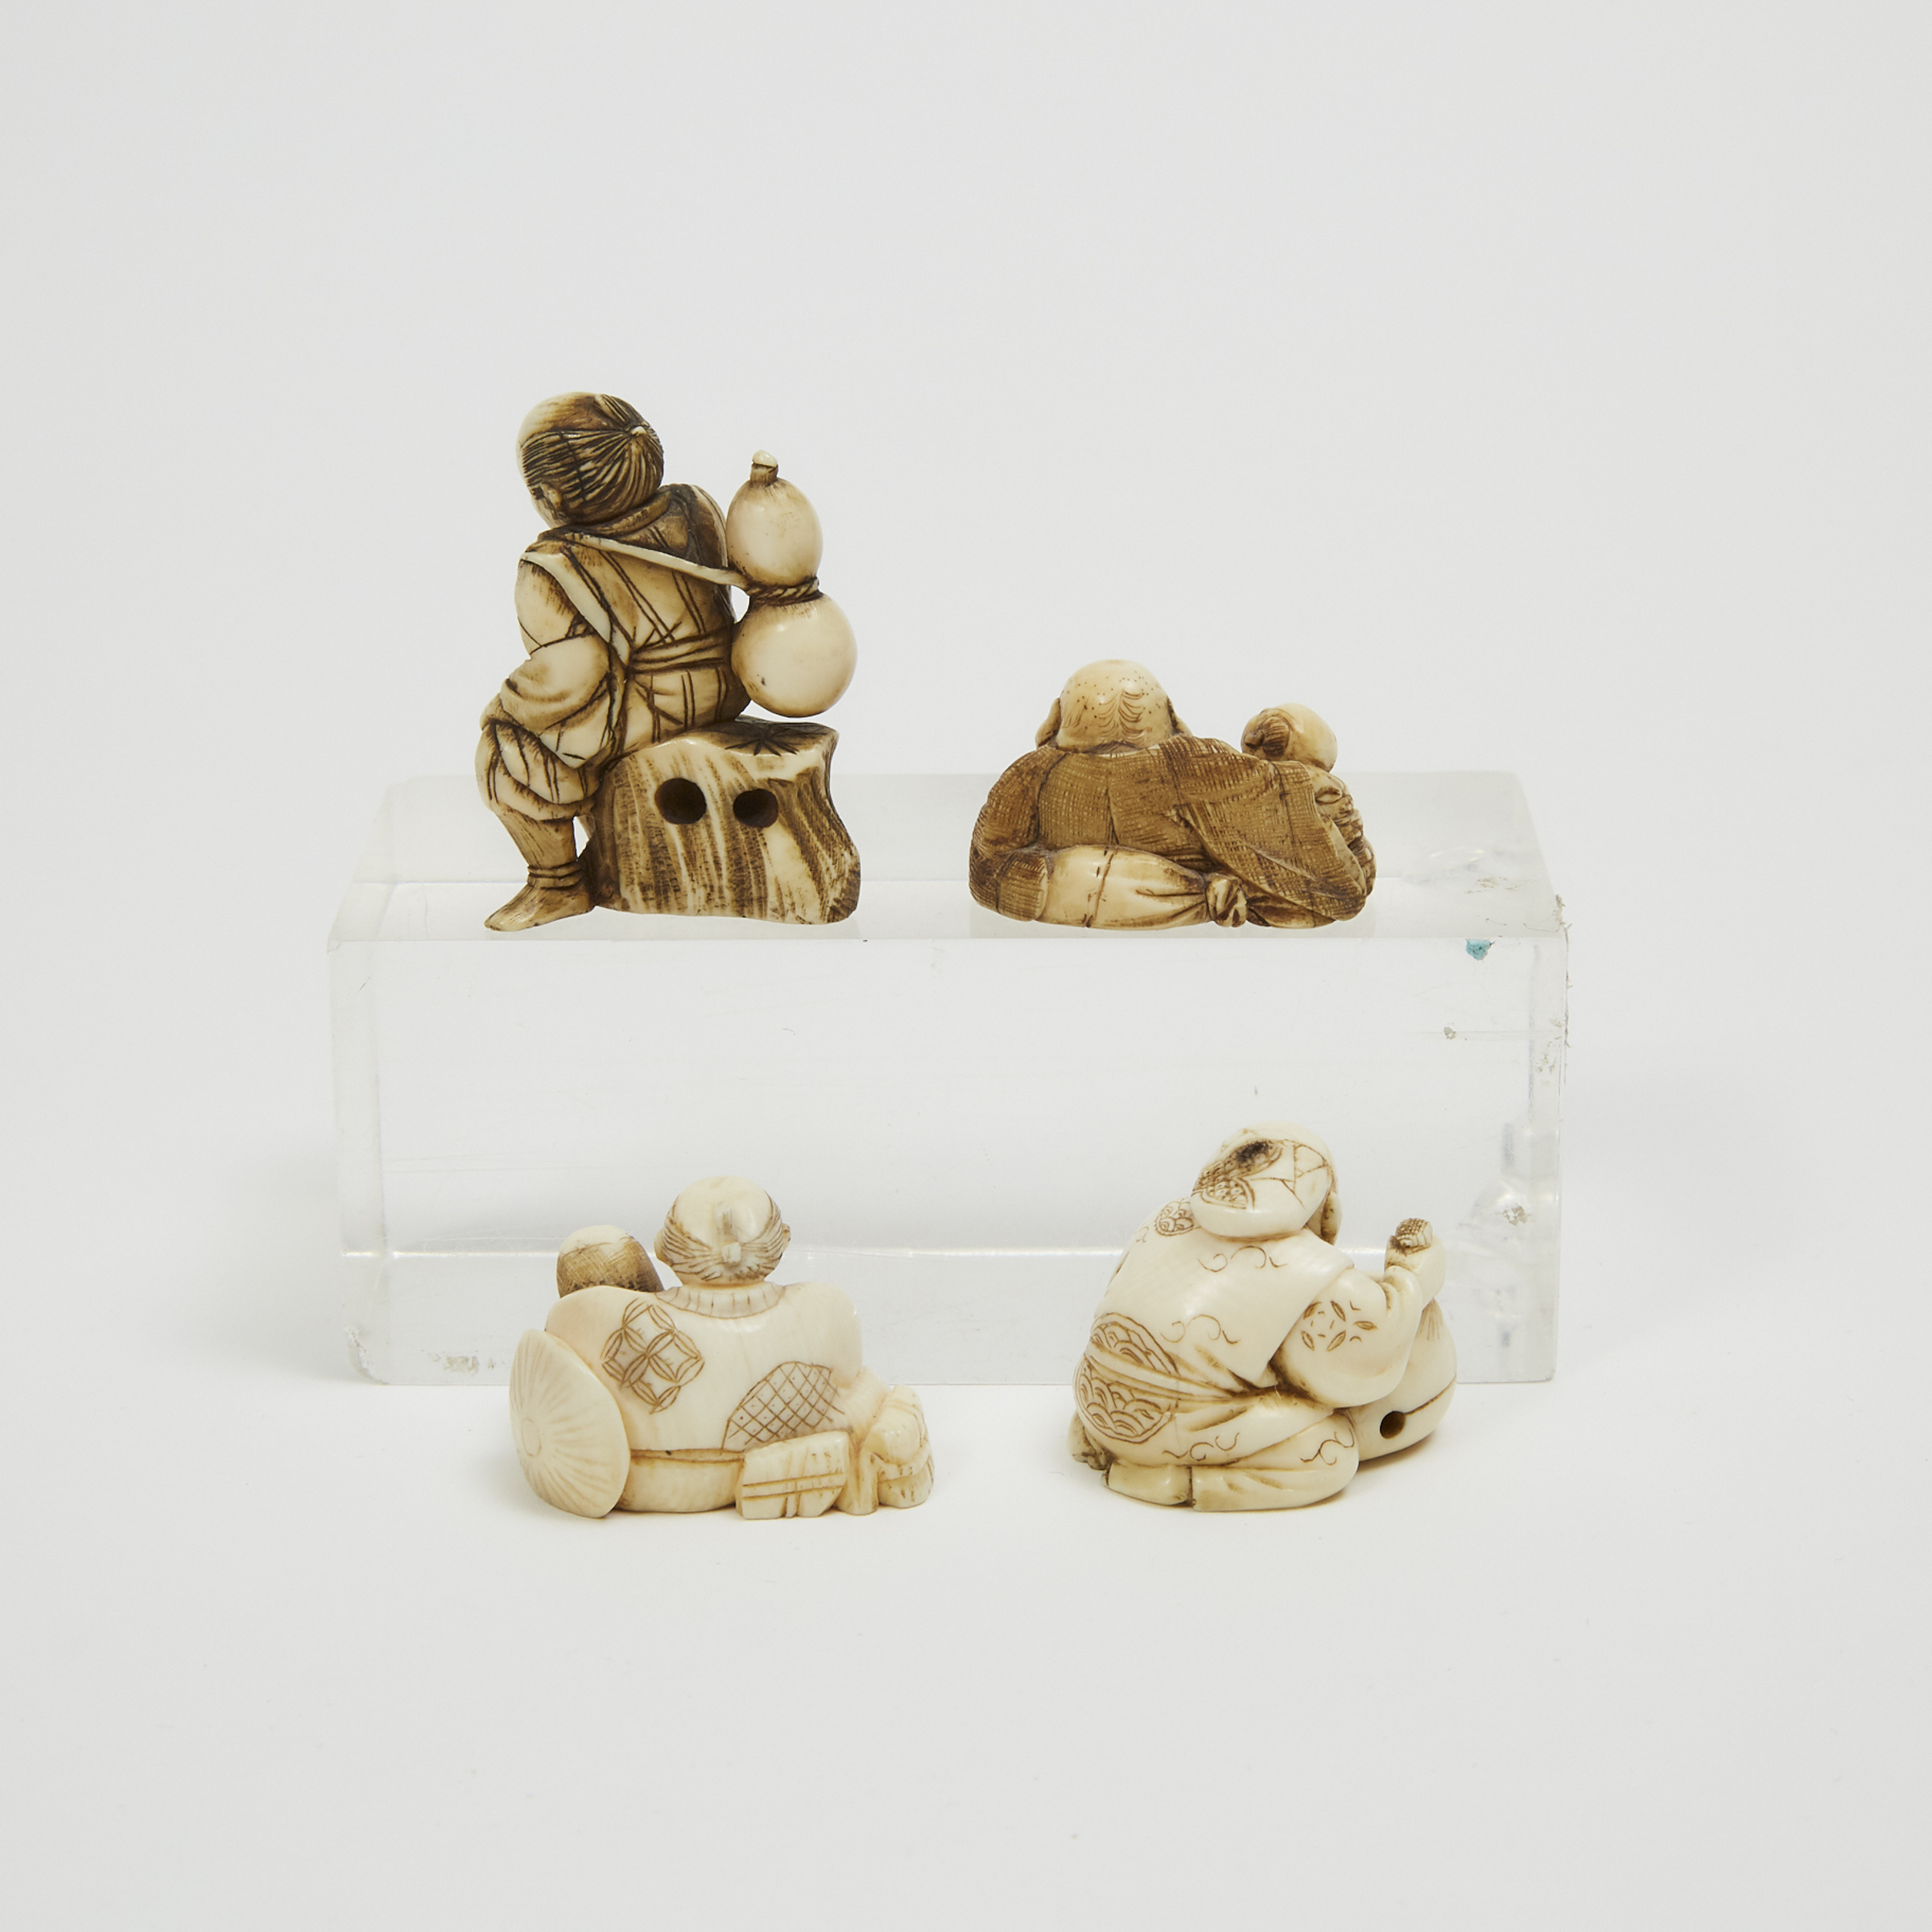 A Group of Four Ivory Figural Netsuke, Late 19th/Early 20th Century